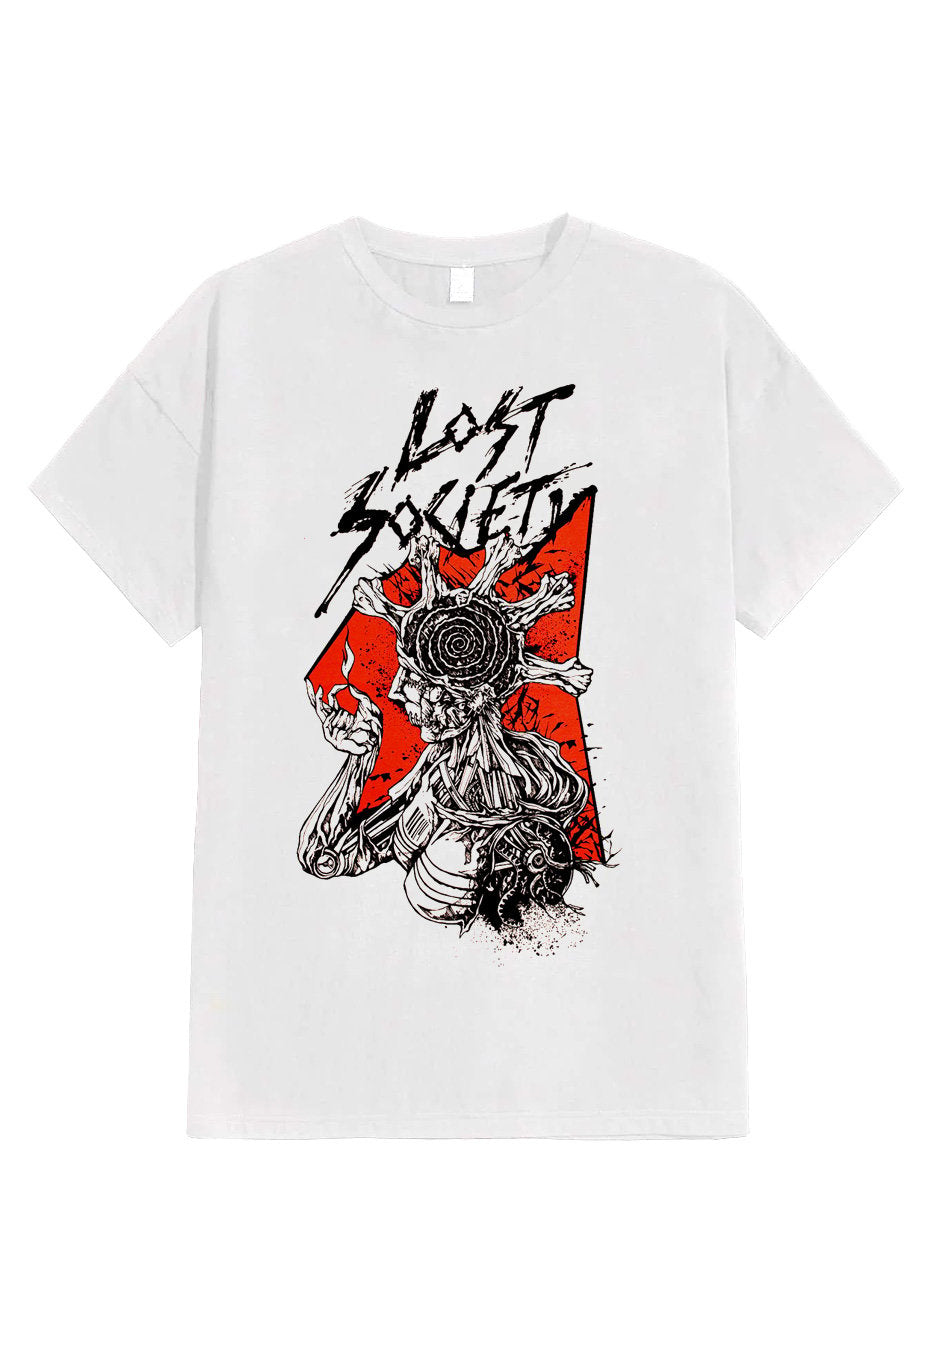 Lost Society - Fists White - T-Shirt